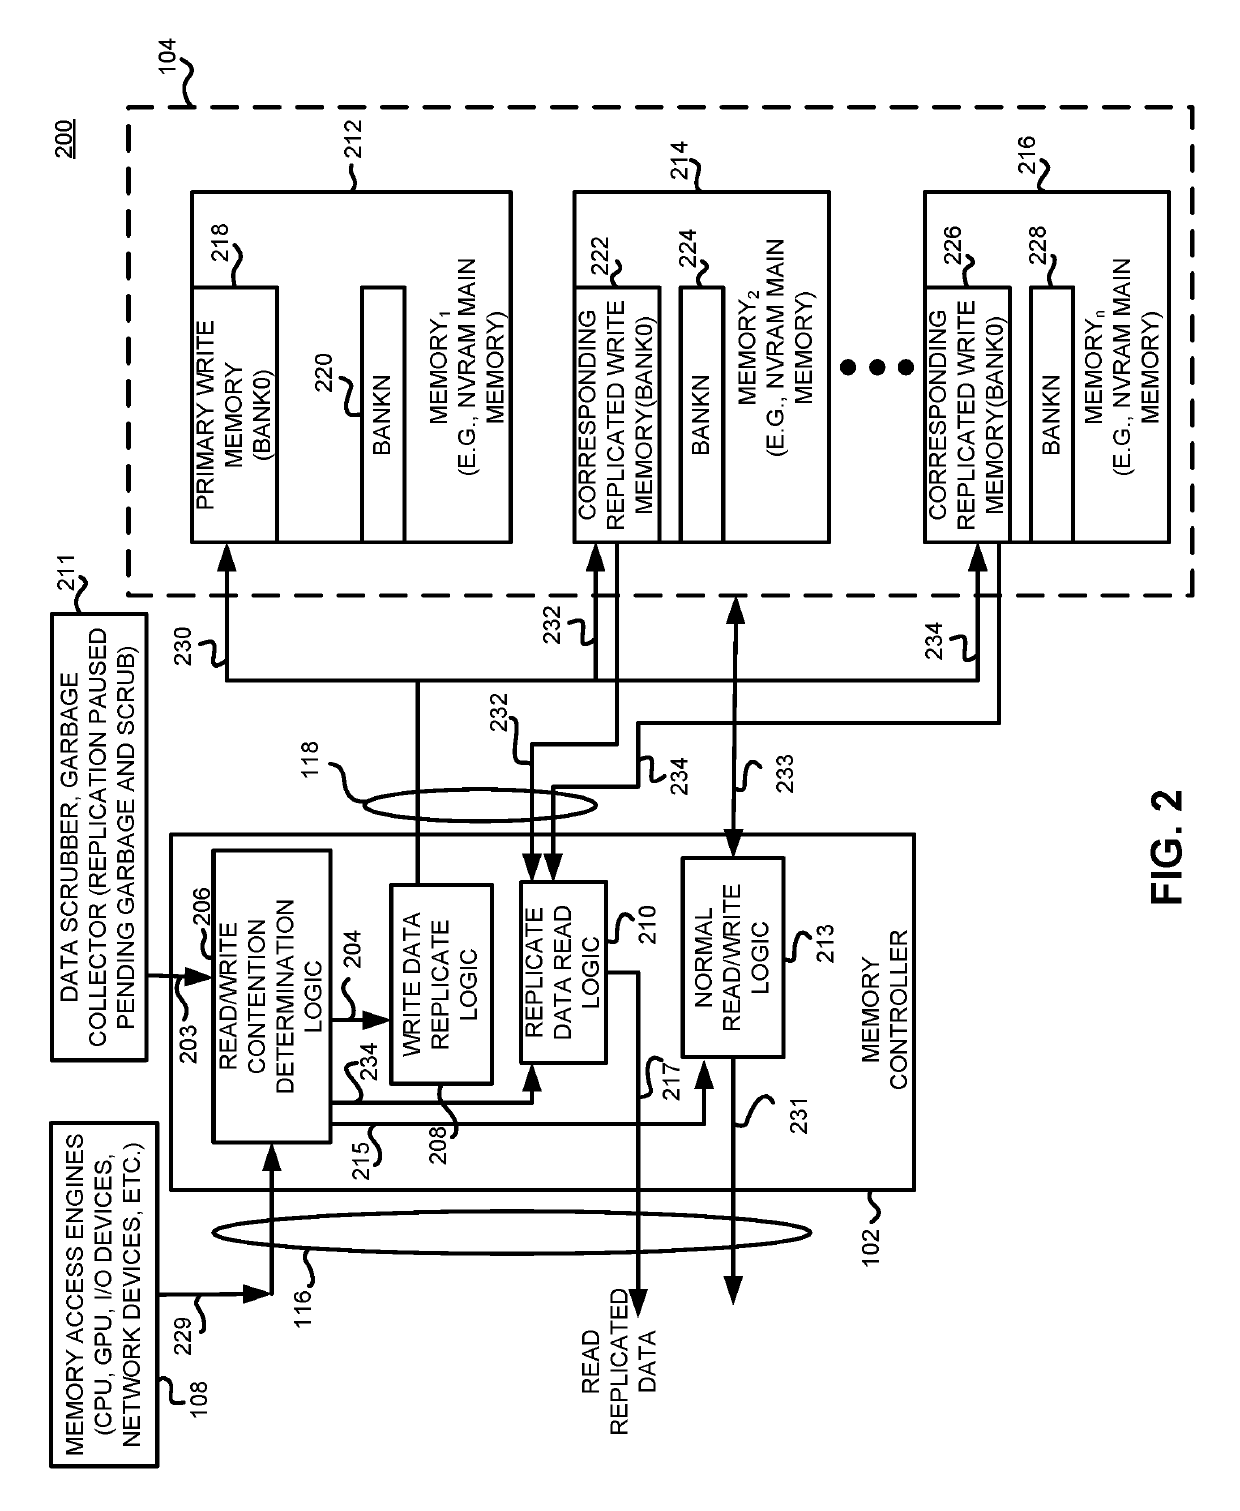 Method and apparatus for reducing memory access latency